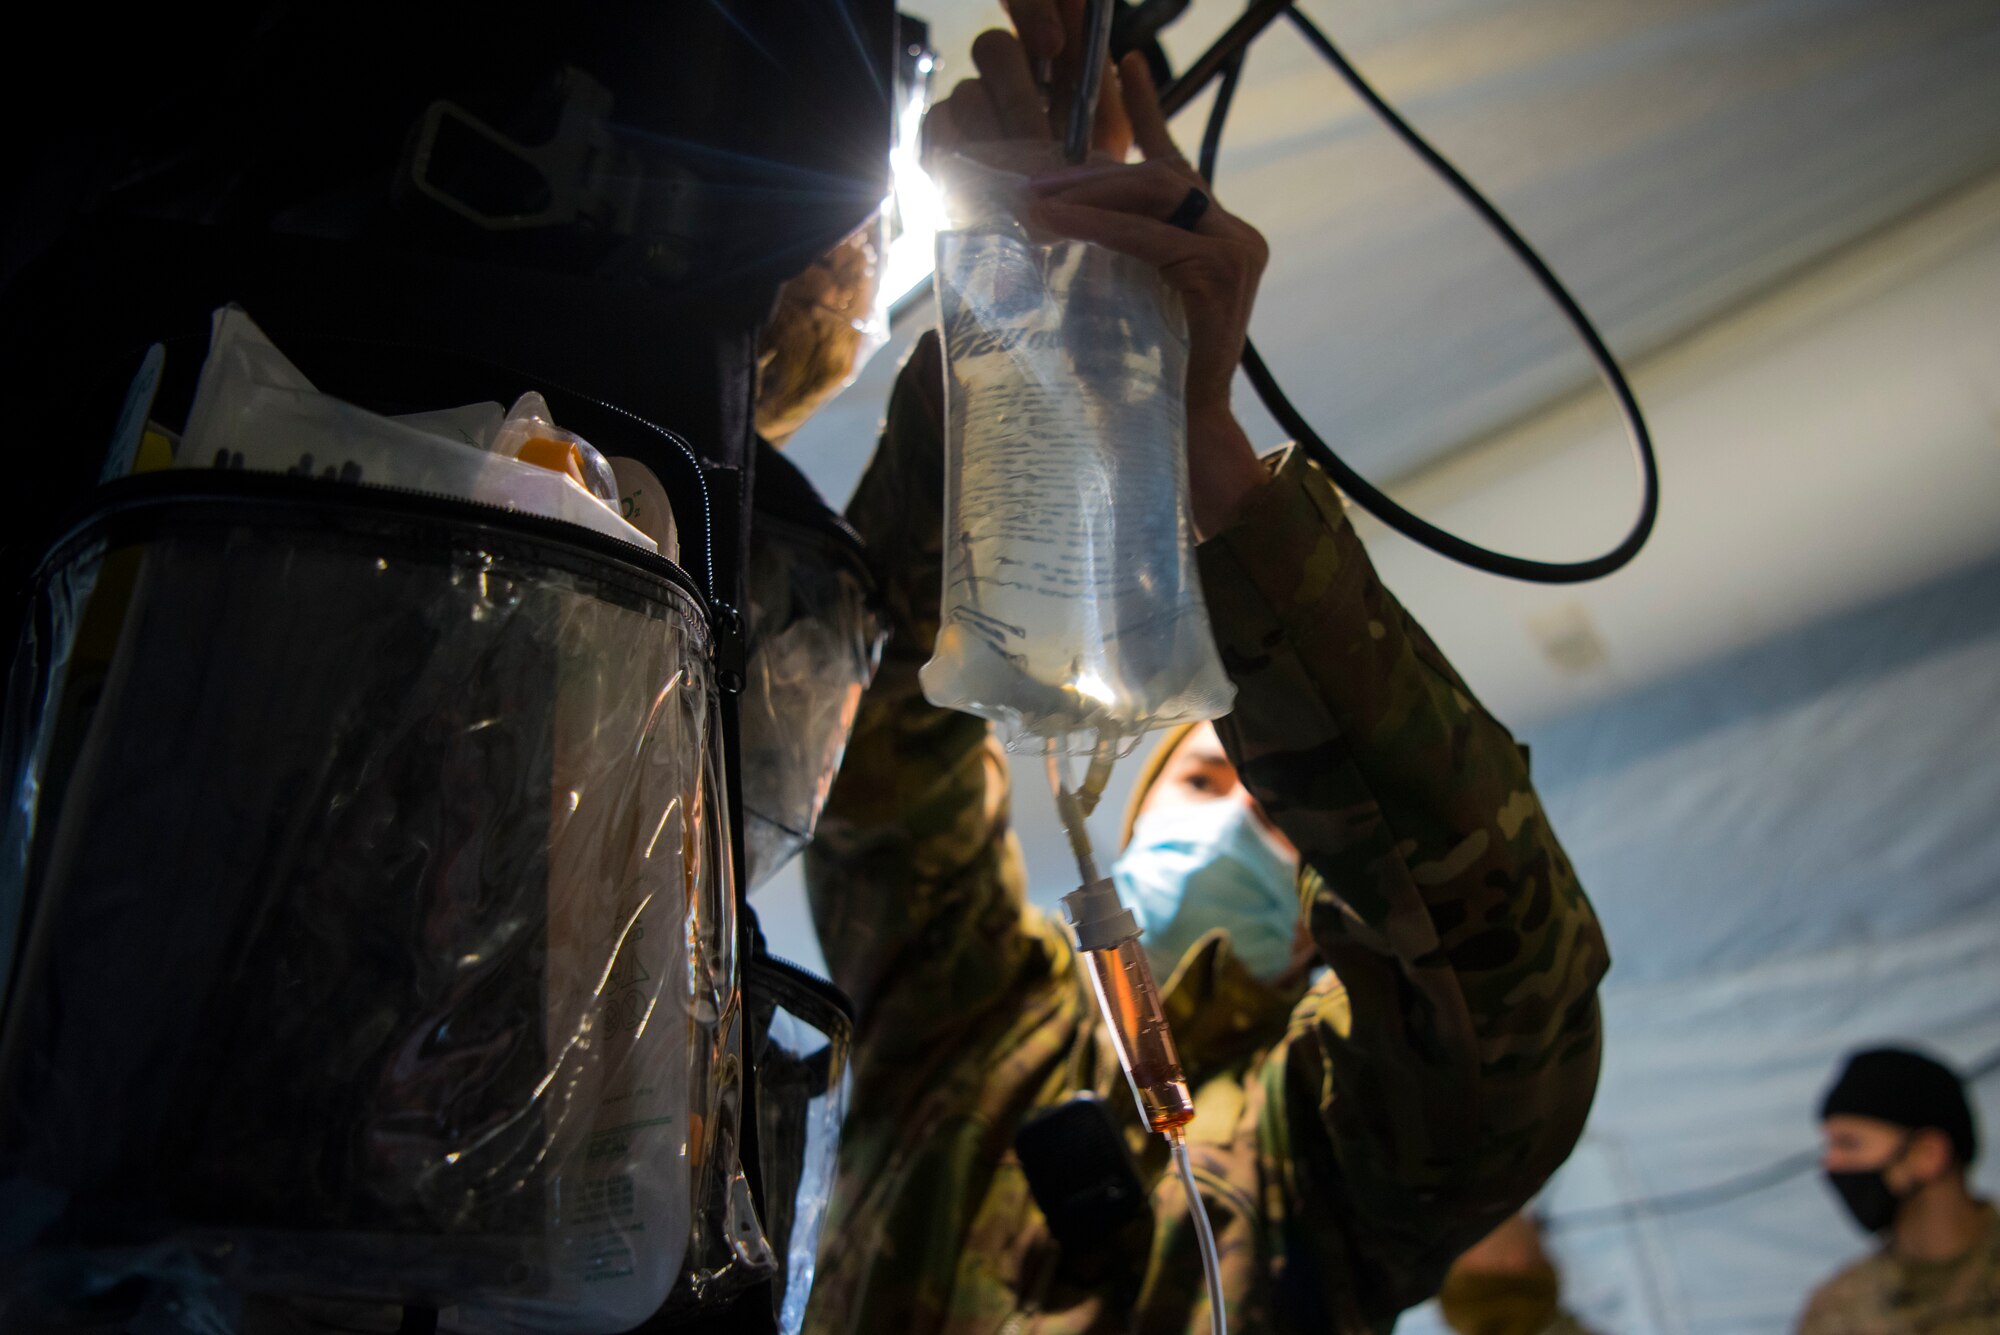 A U.S. Airman assigned to the 435th Contingency Response Support Squadron places an intravenous therapy fluid bag above a patient while participating in combat lifesaver training during exercise Agile Wolf 21-01.